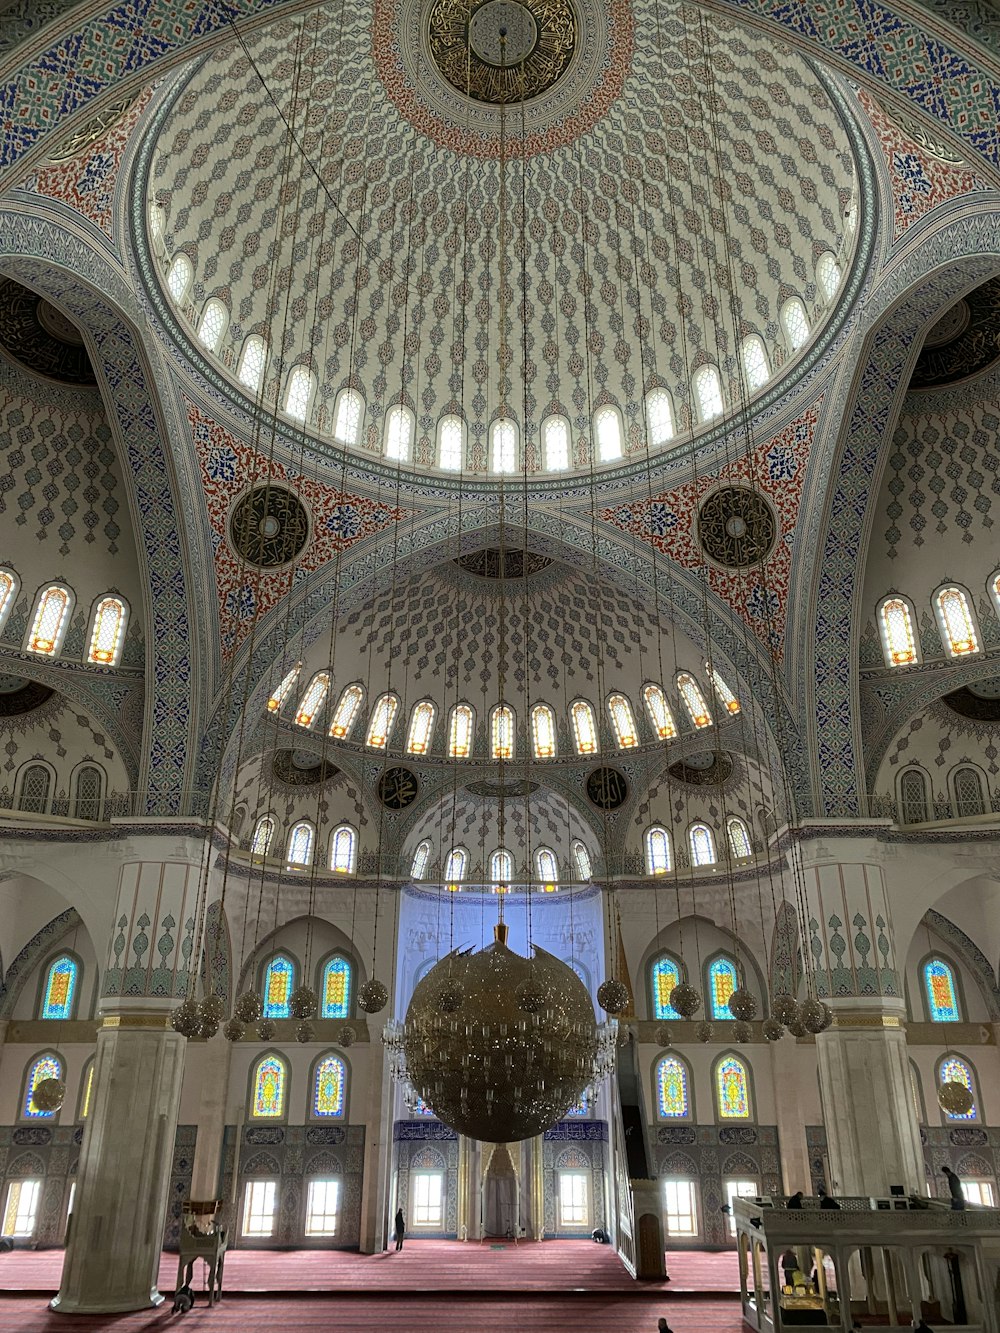 the inside of a large building with a dome ceiling